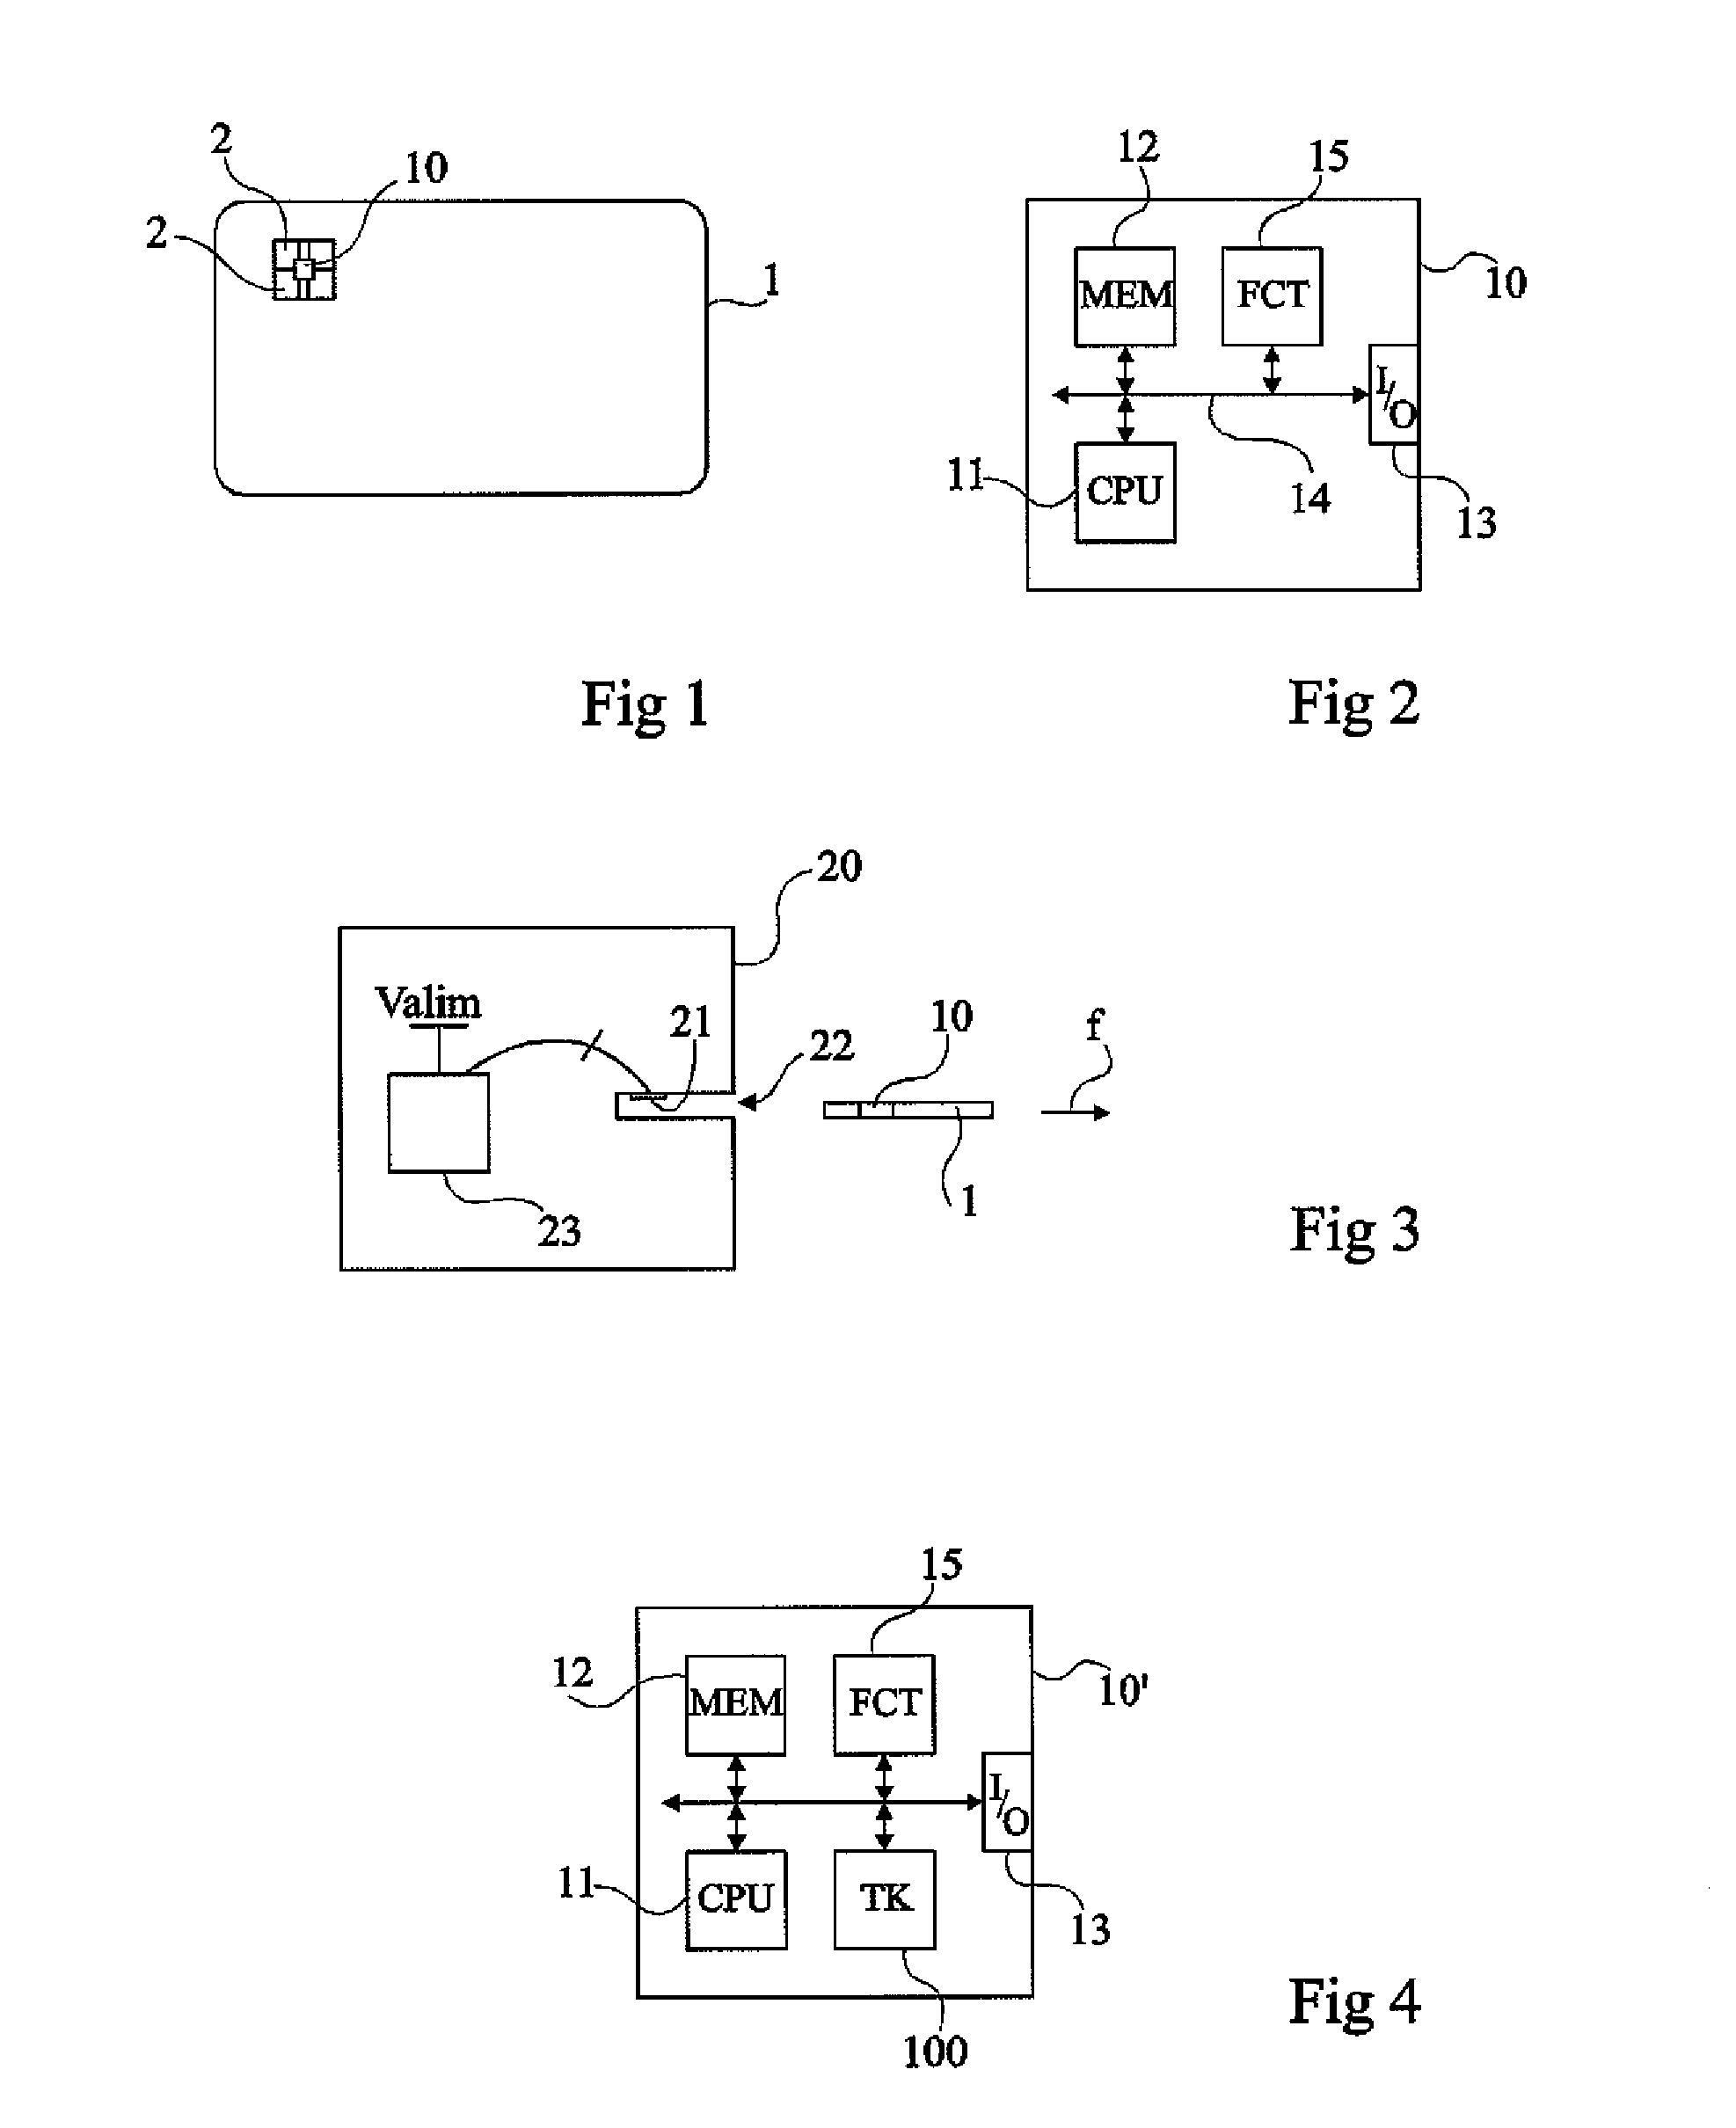 Protection of information contained in an electronic circuit